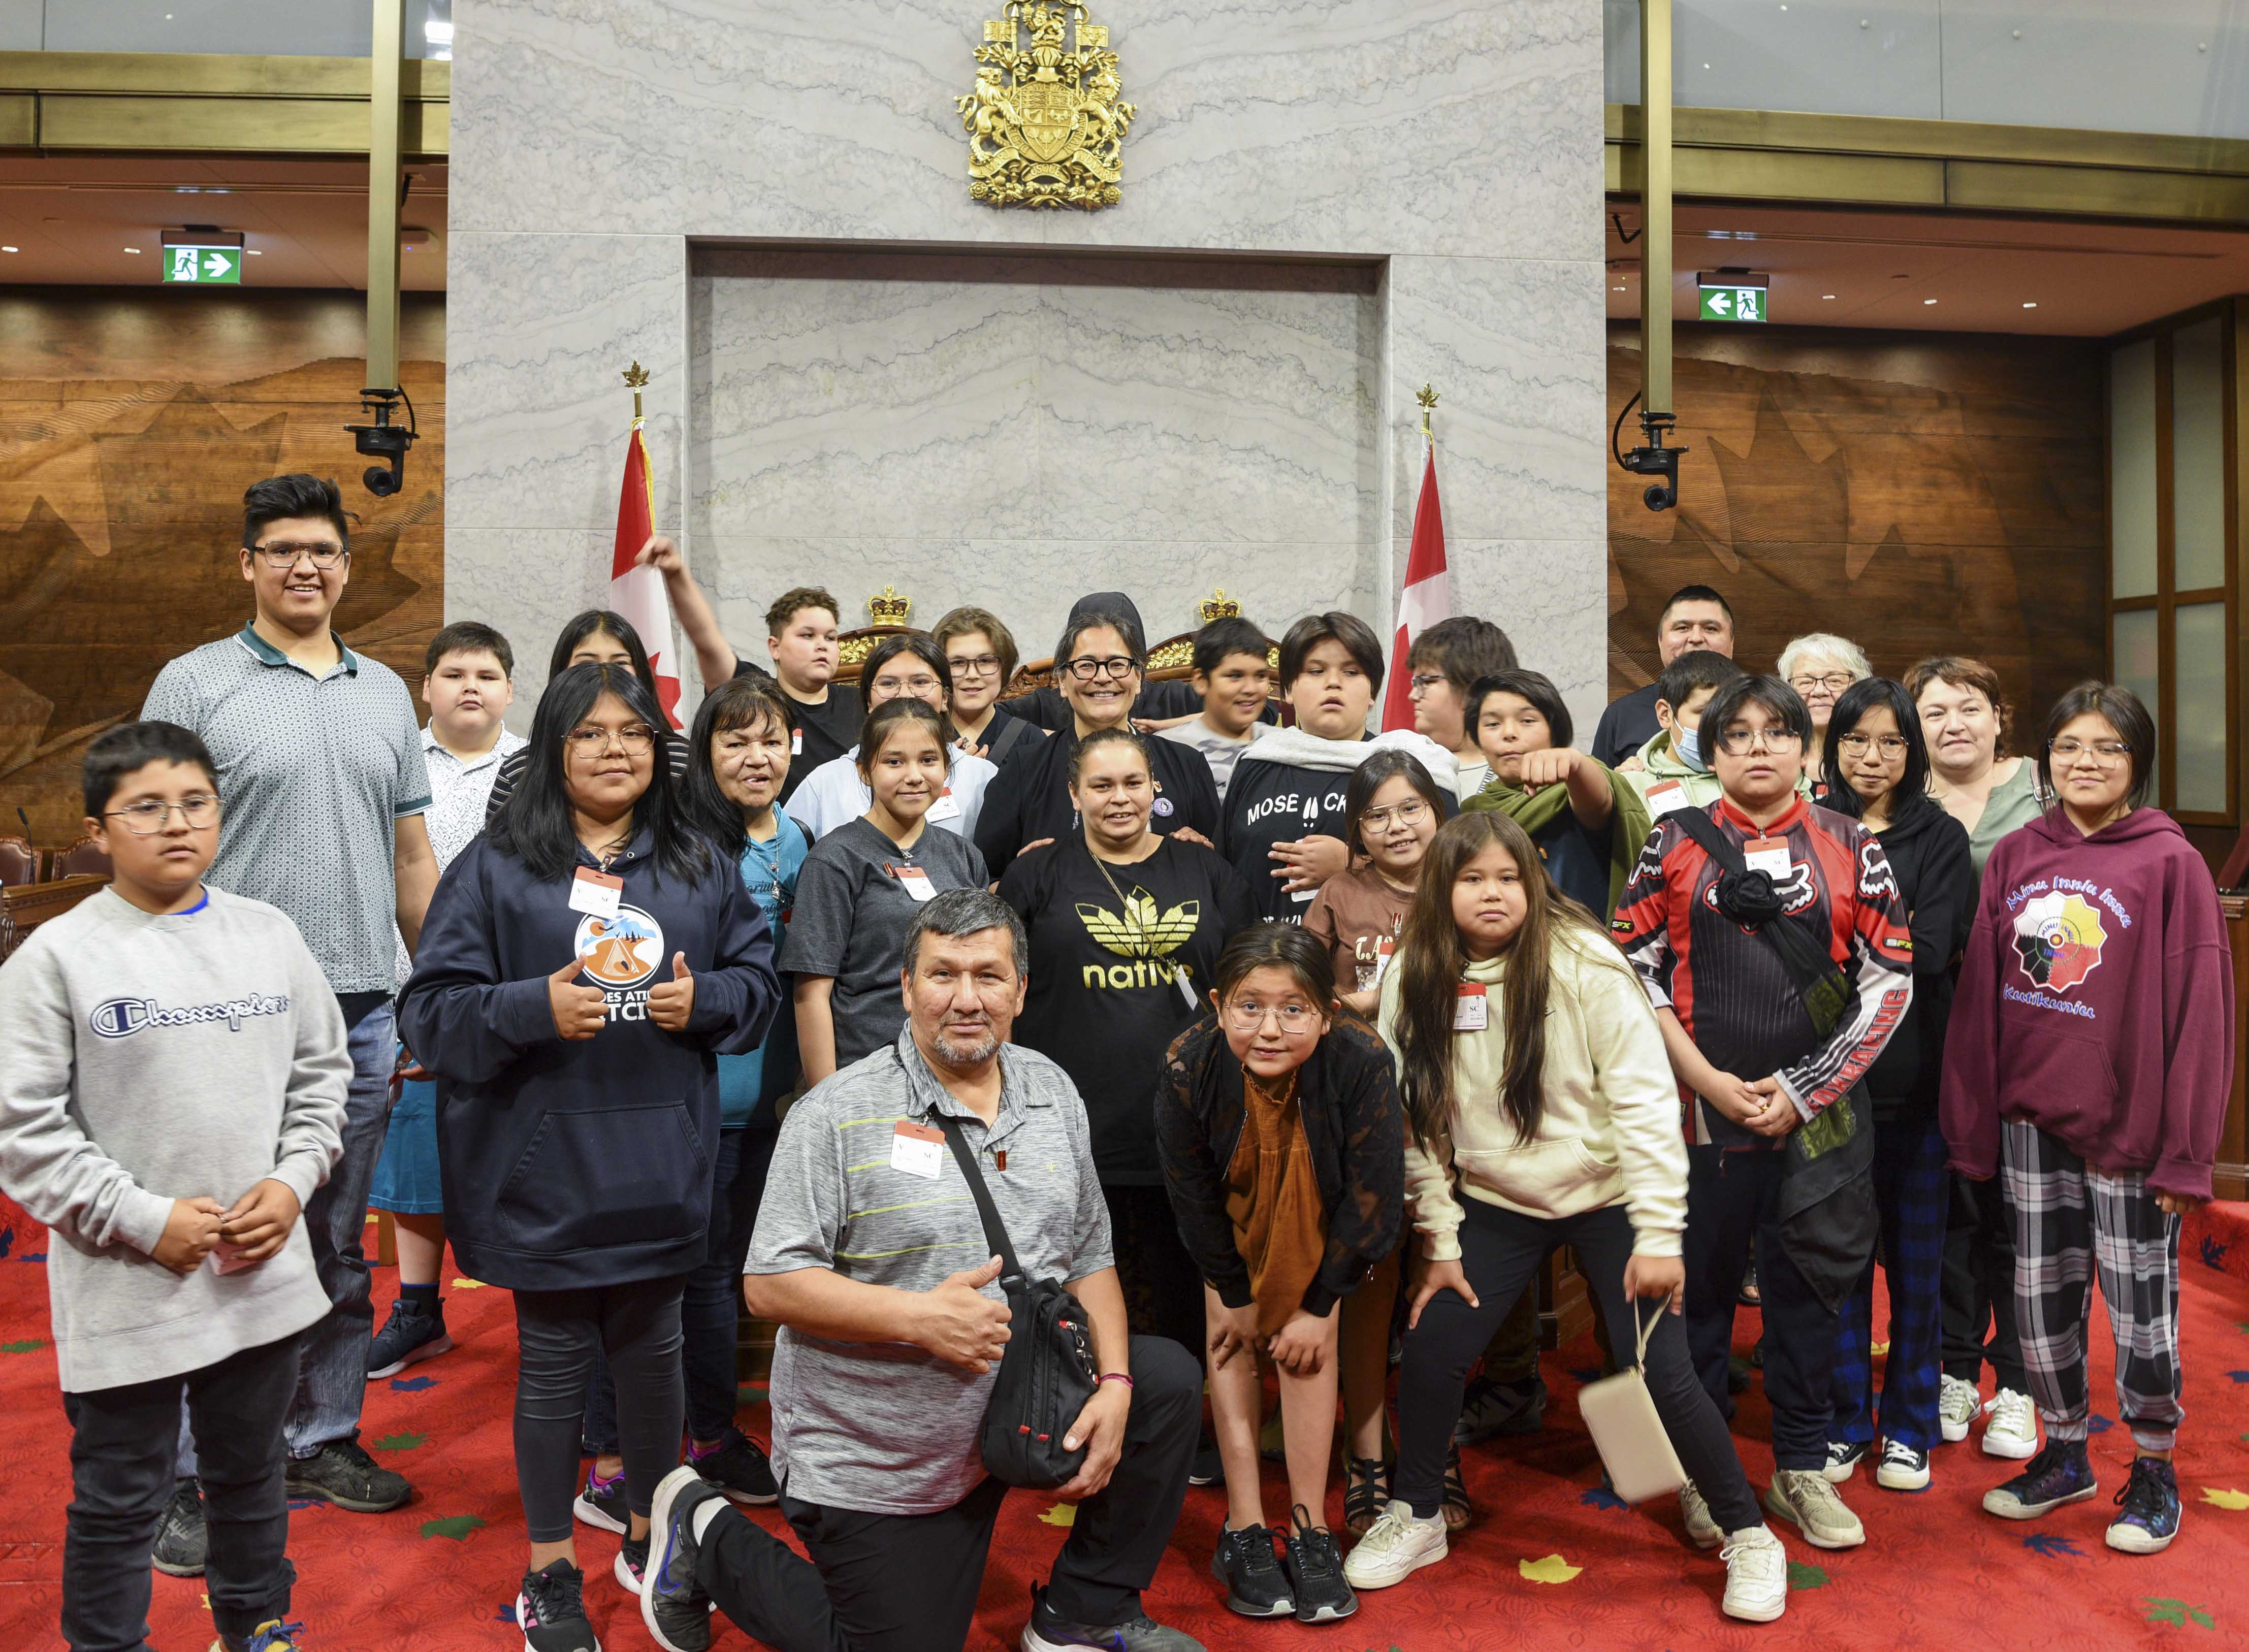 A group of students, school staff and Senator Michèle Audette pose in front of the thrones in the Senate Chamber.